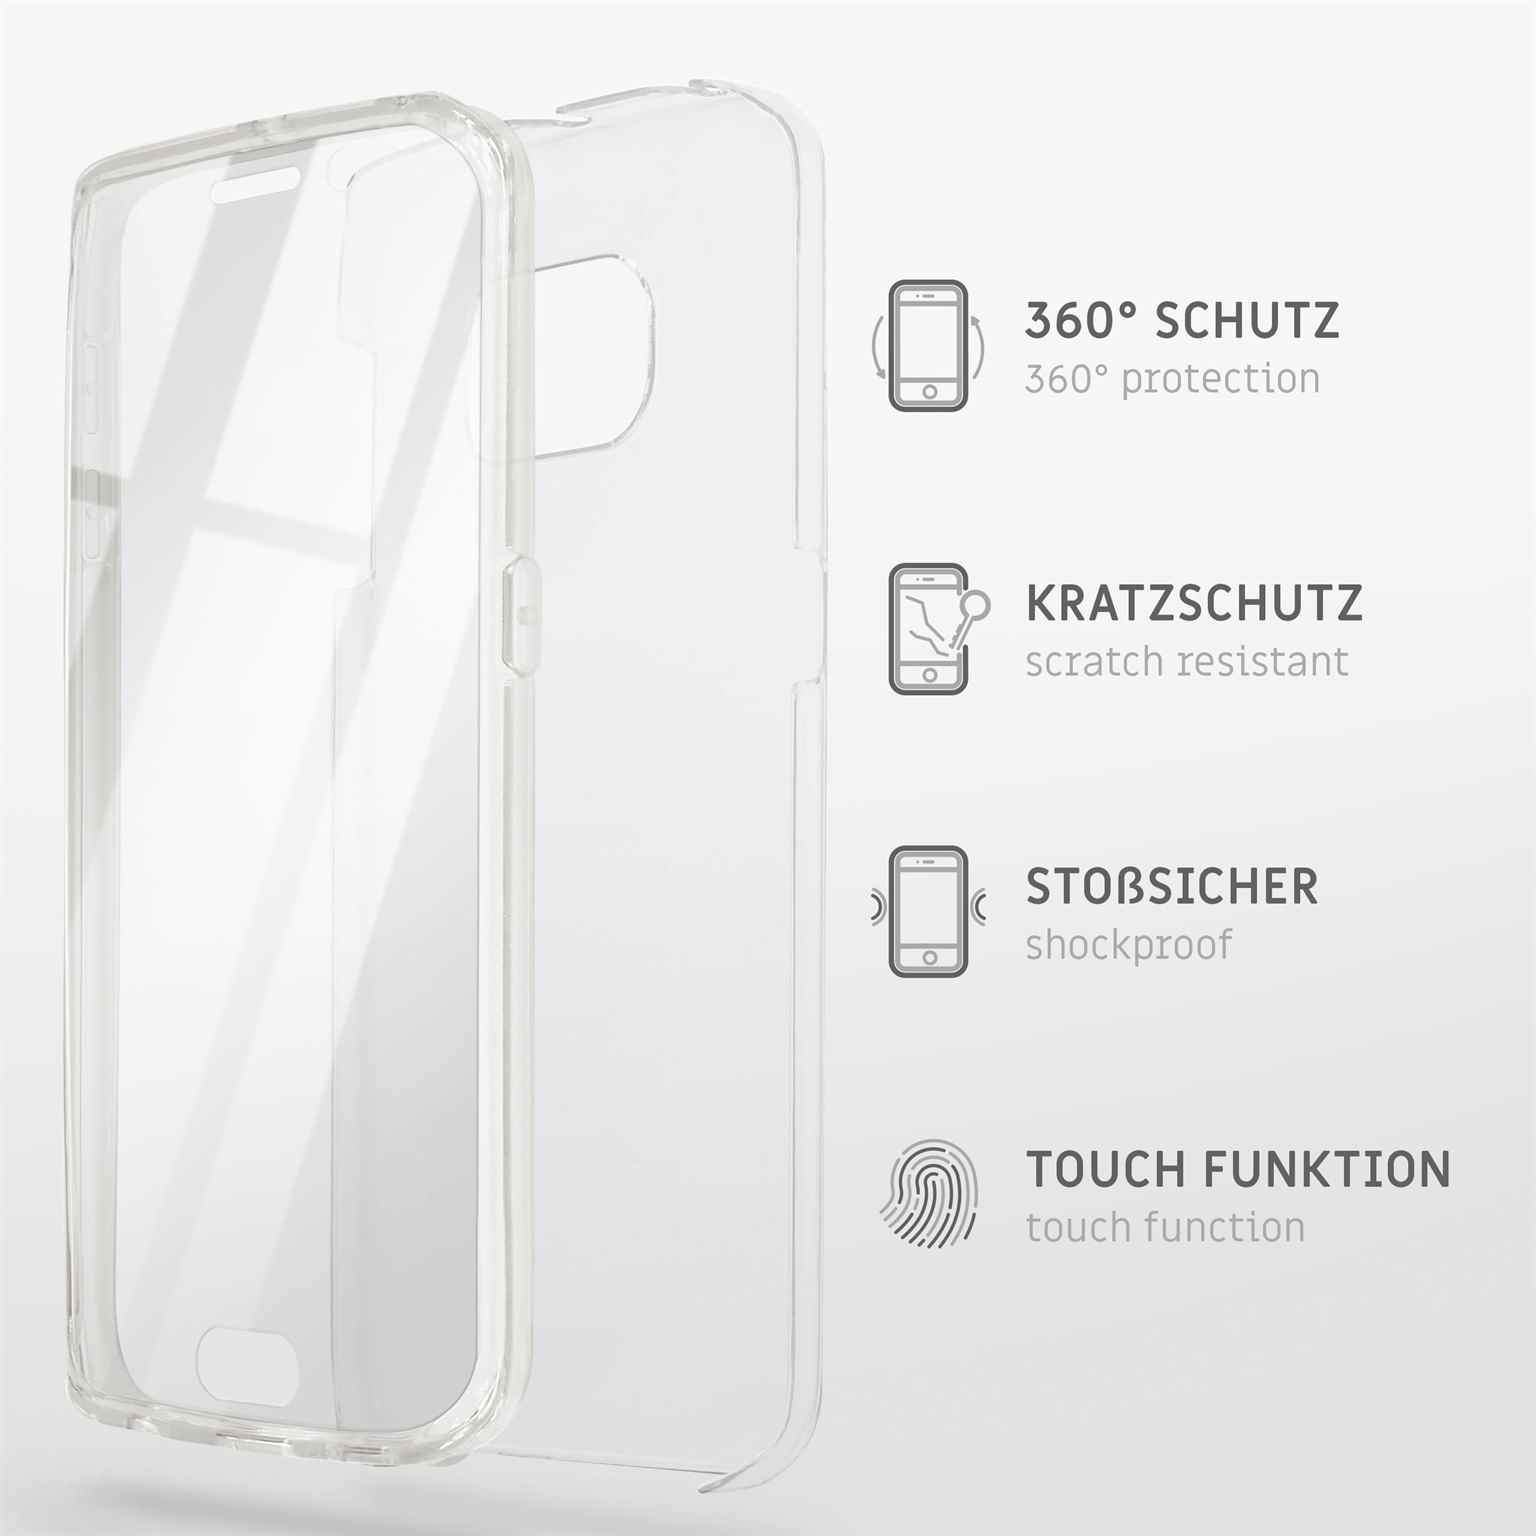 Ultra-Clear Case, Full S8, ONEFLOW Touch Cover, Galaxy Samsung,